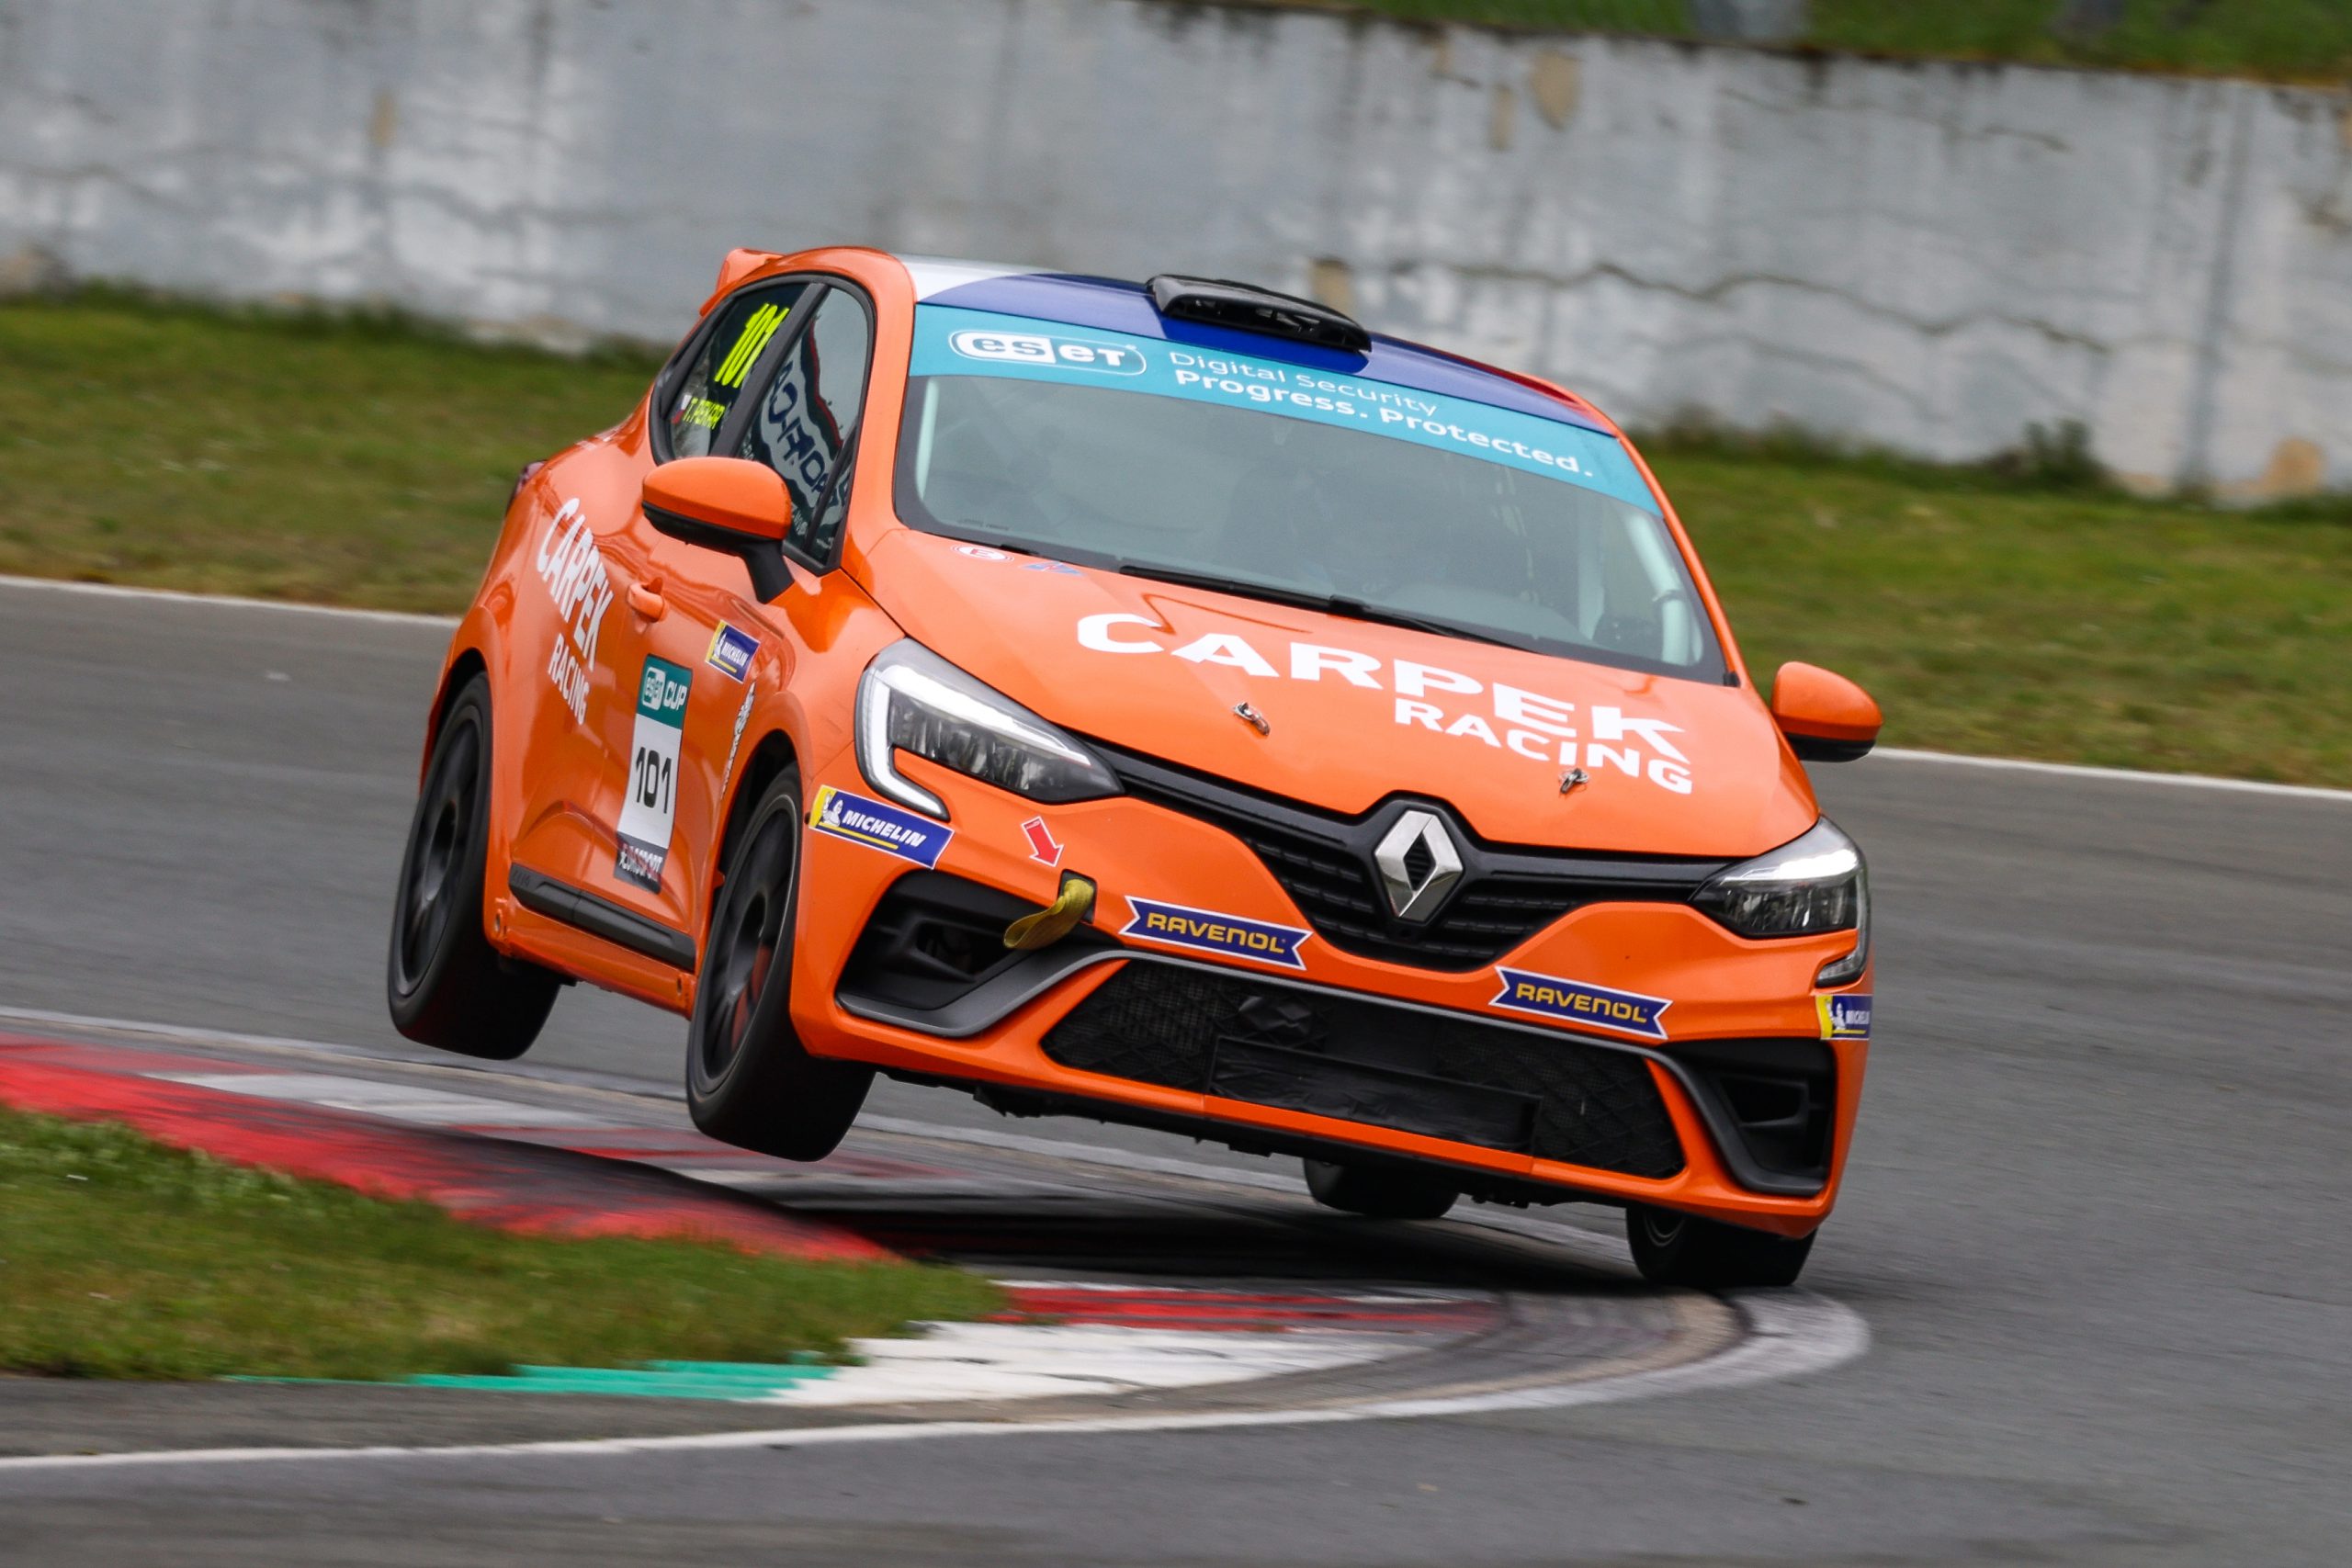 Tomáš Pekař won the first race of the Clio Cup